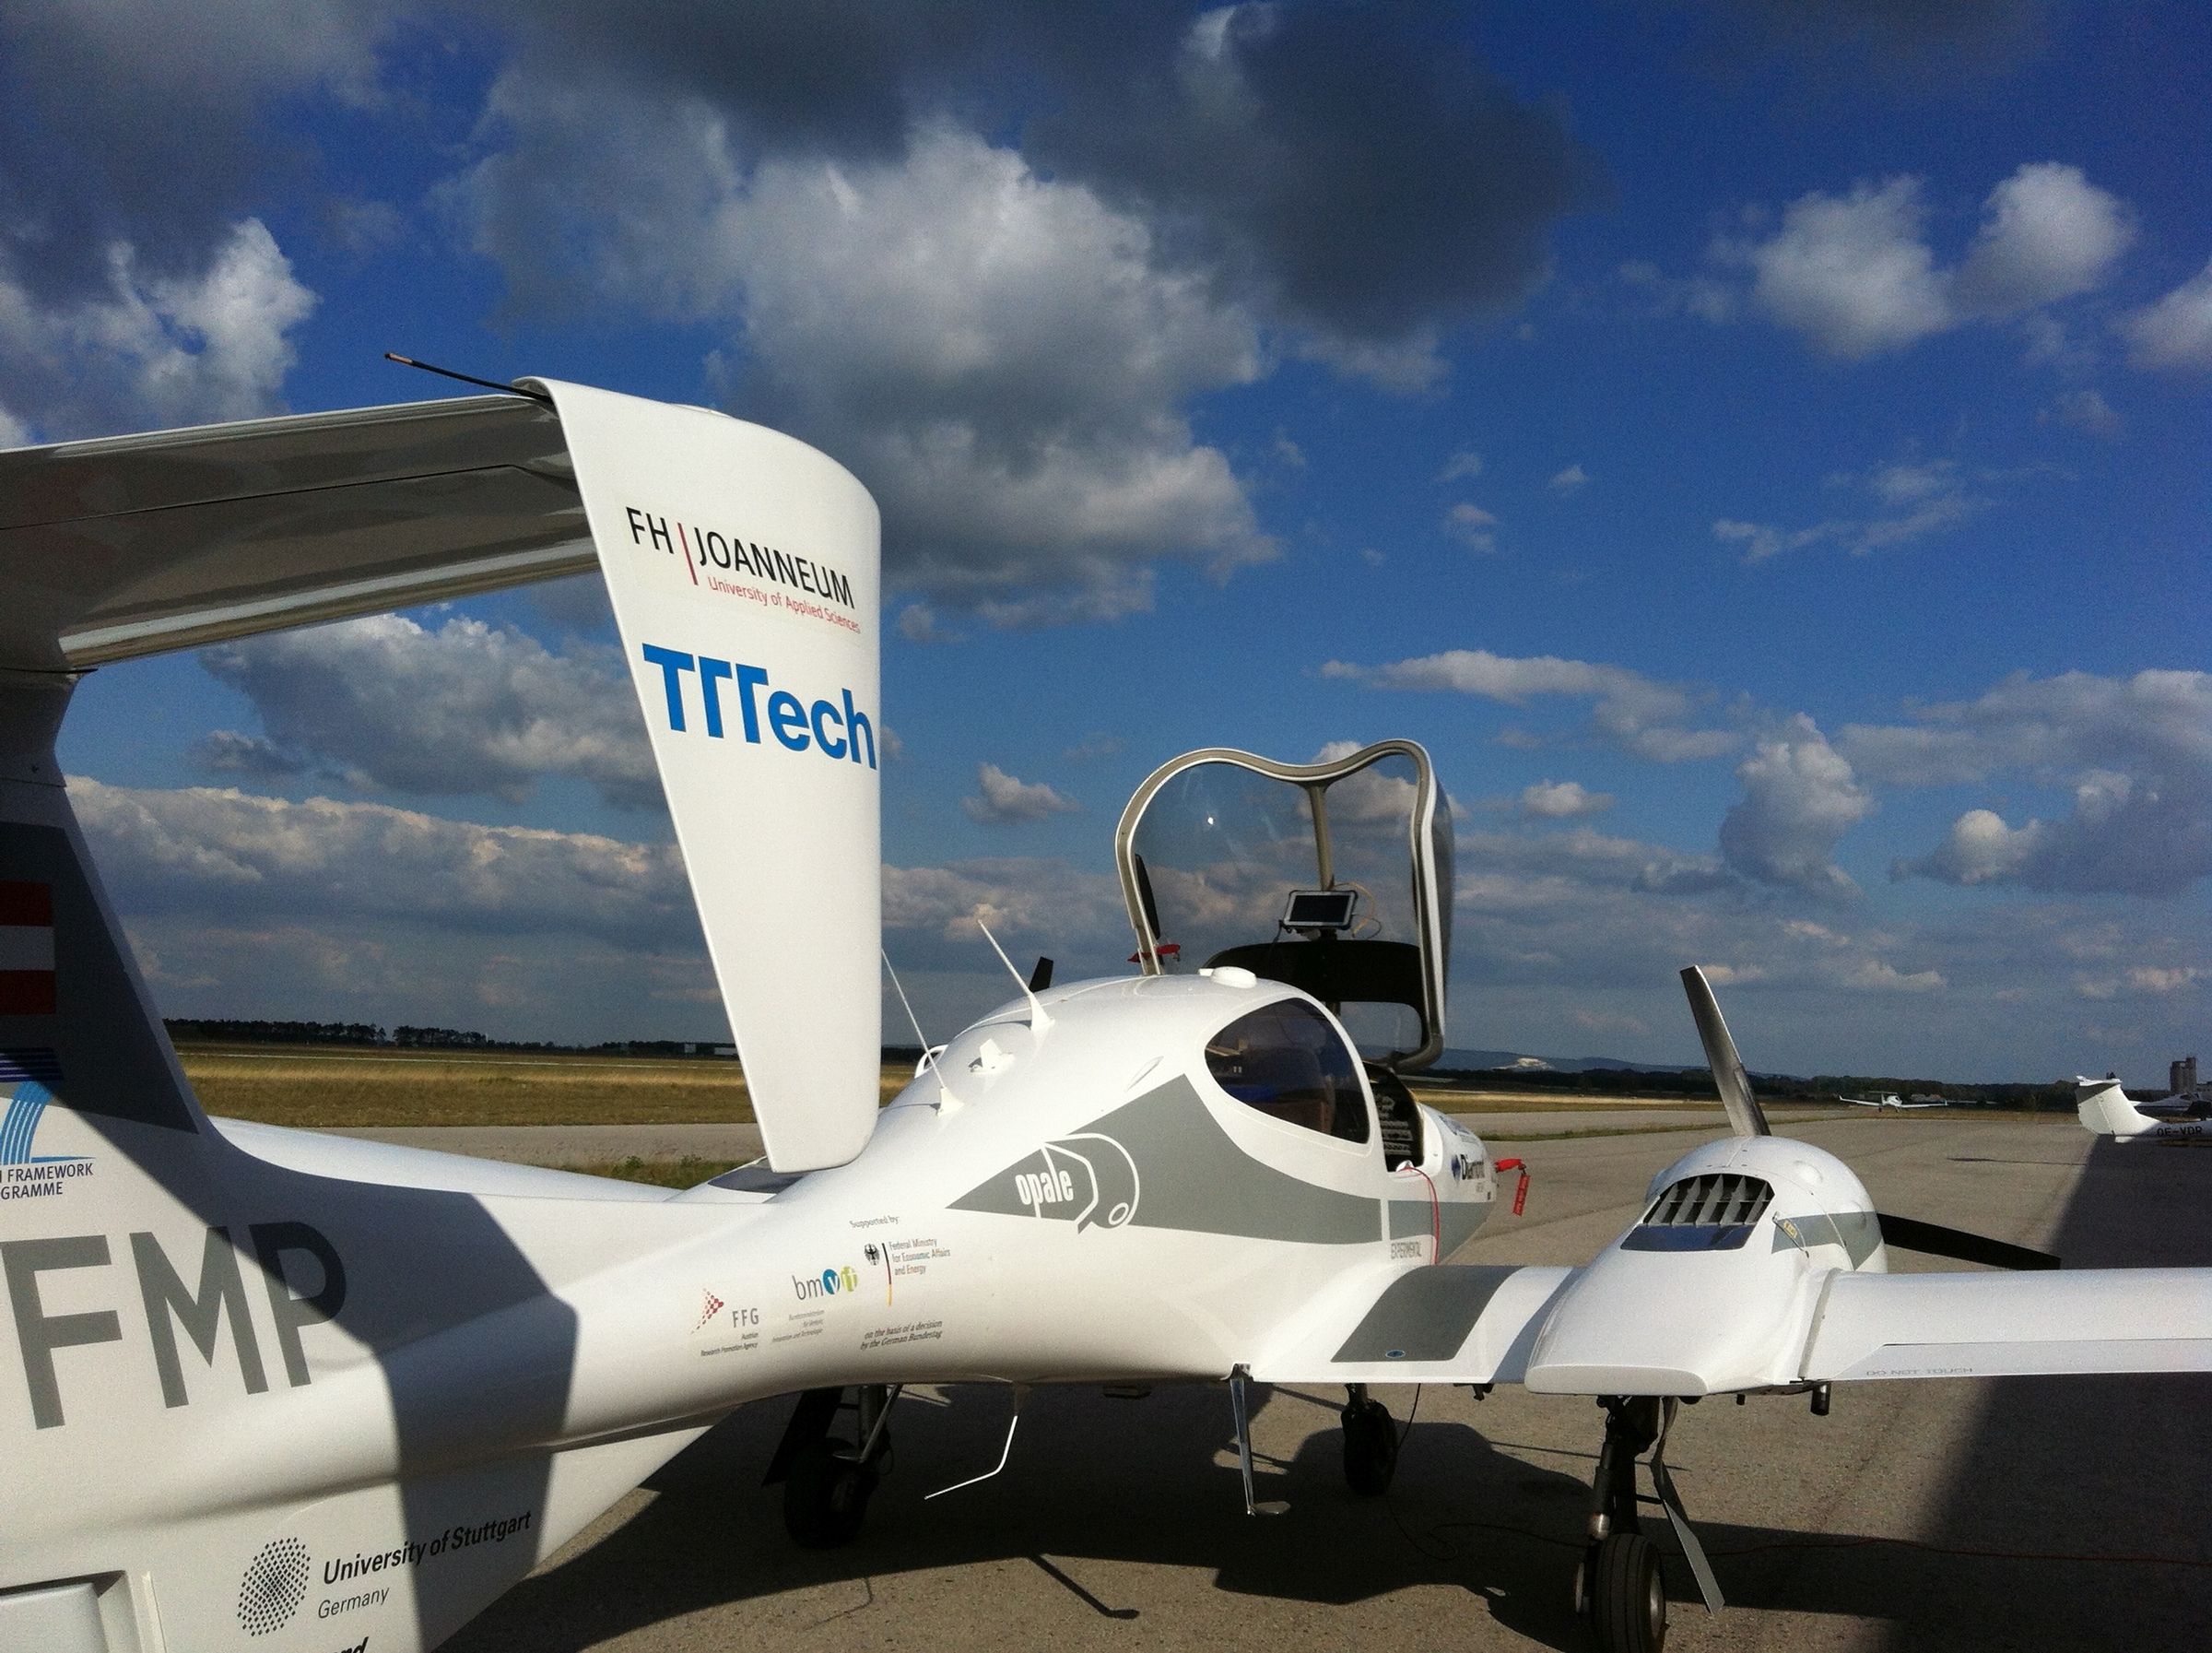 The twin-engine DA 42 plane is provided by Diamond Aircraft.